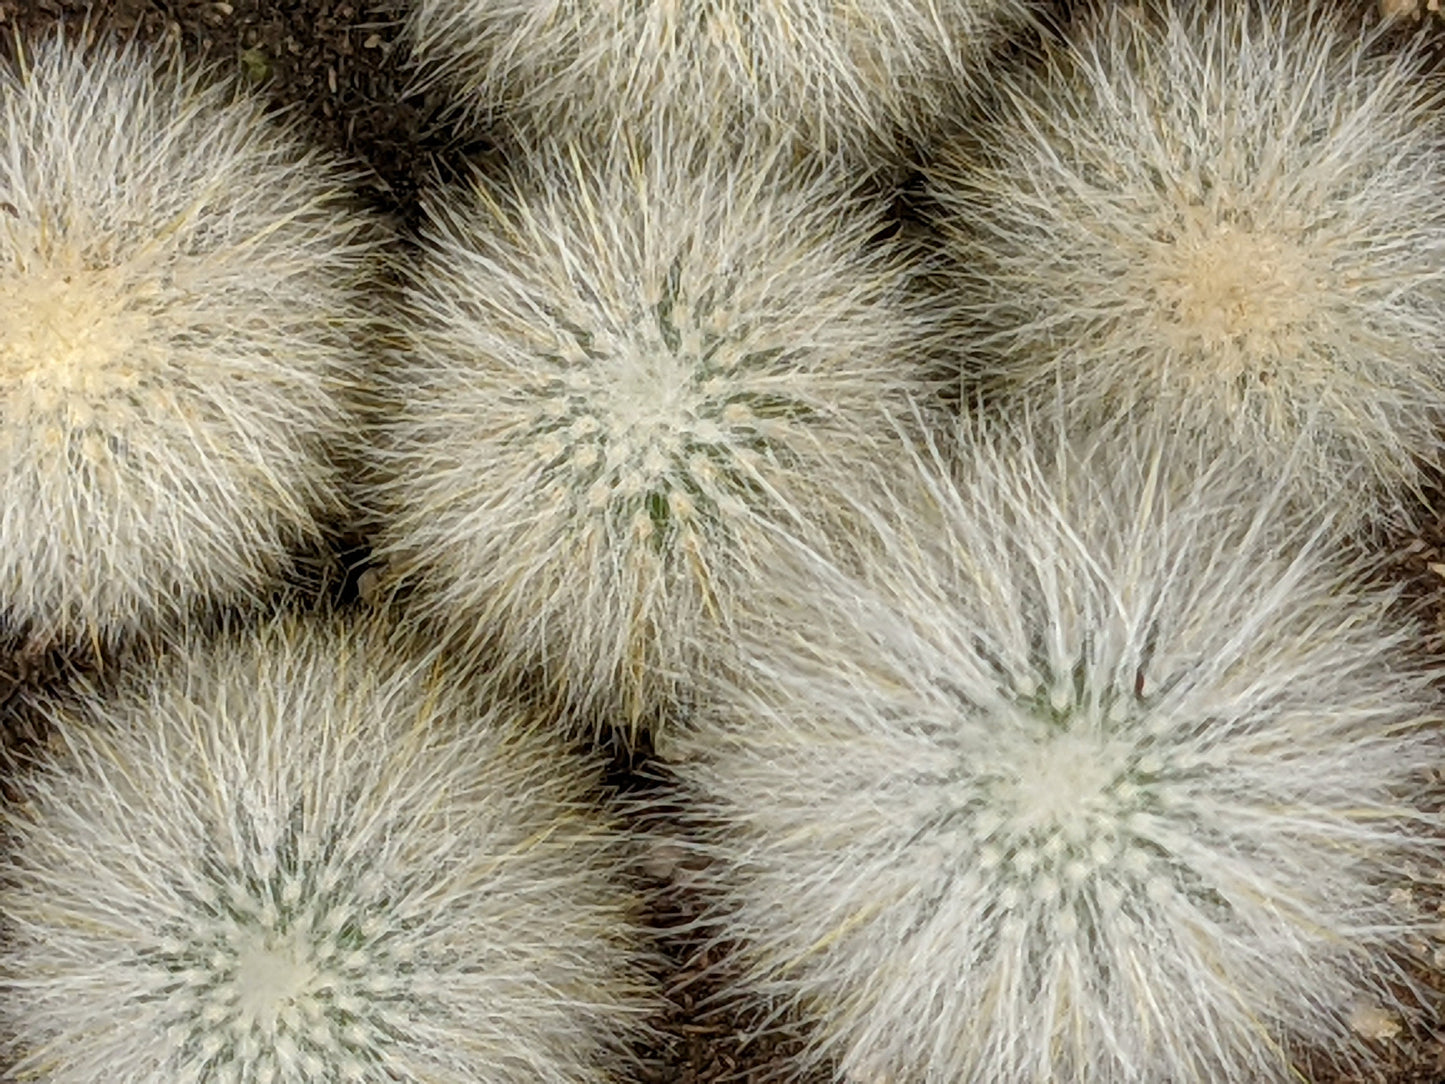 Silver Torch Hairy Small Baby Cute Spiky Cactus - White Cactus - Baby Cacti -Indoor Outdoor Alive Plant - Cleistocactus strausii